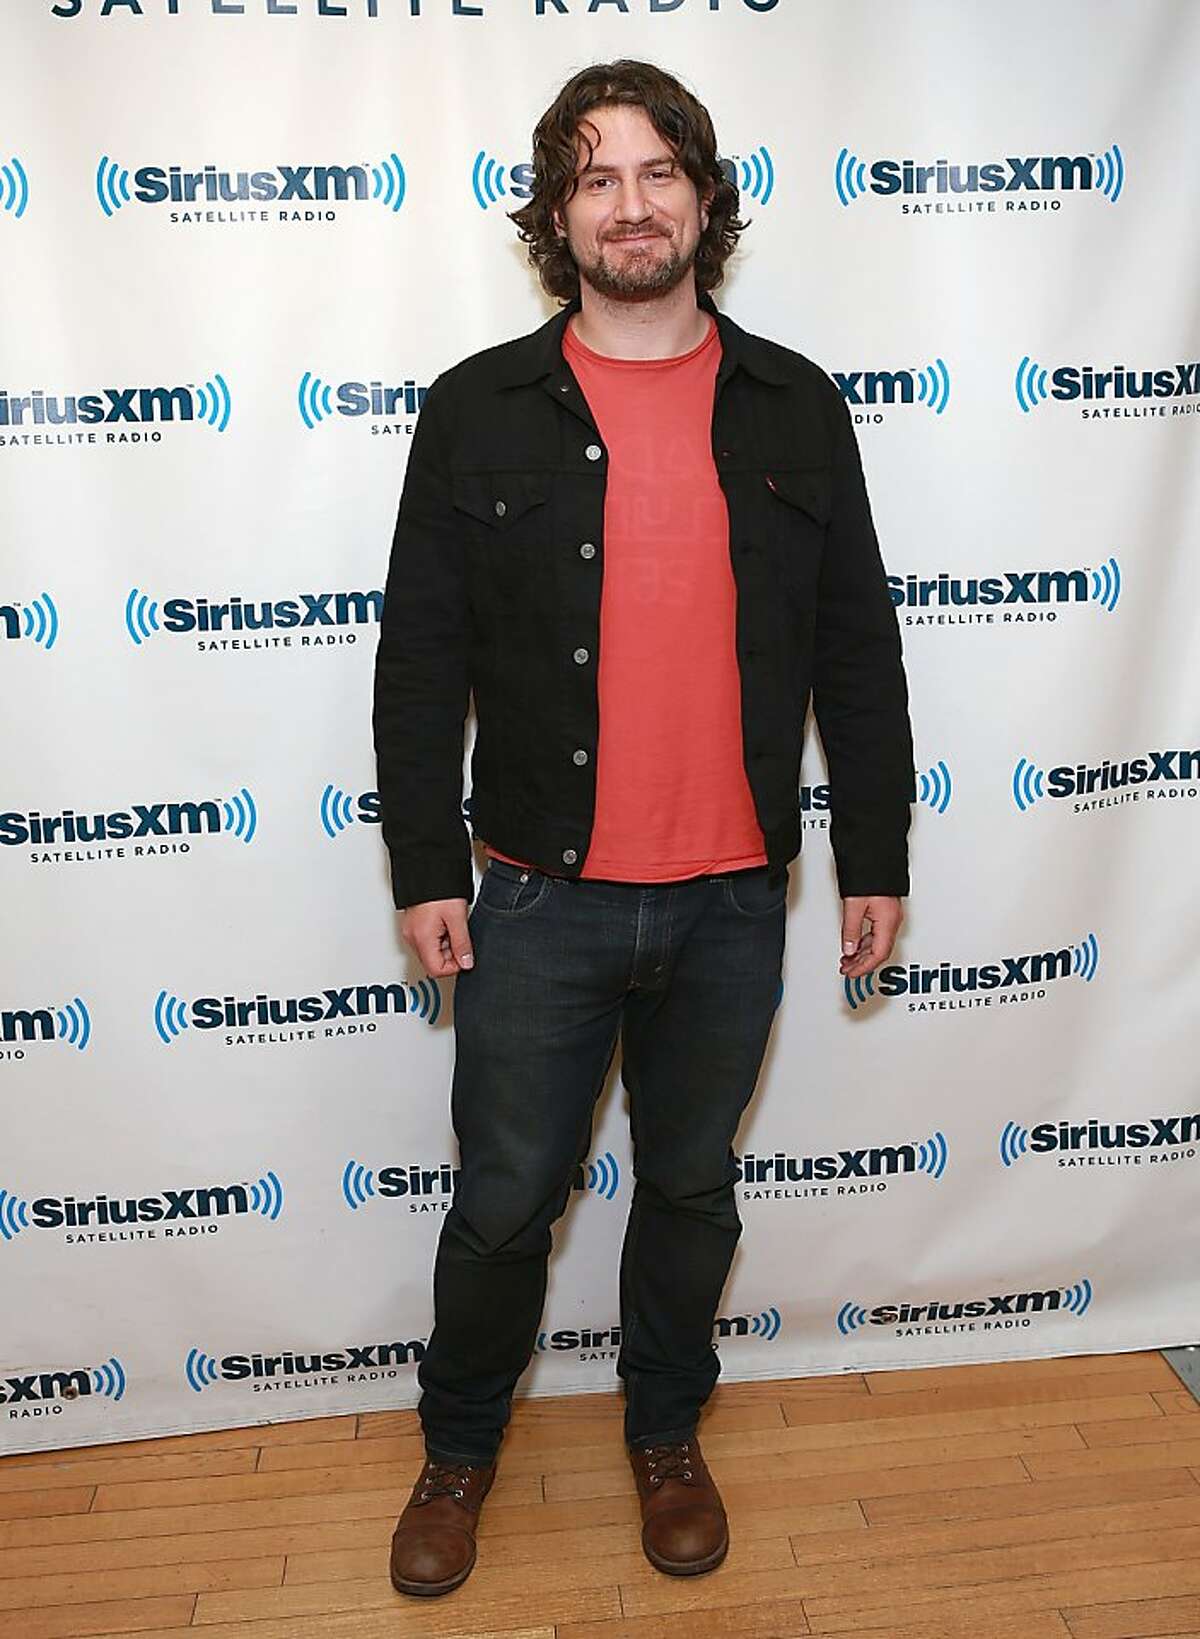 NEW YORK, NY - JUNE 21: Matt Nathanson visits at SiriusXM Studios on June 21, 2013 in New York City. (Photo by Robin Marchant/Getty Images)